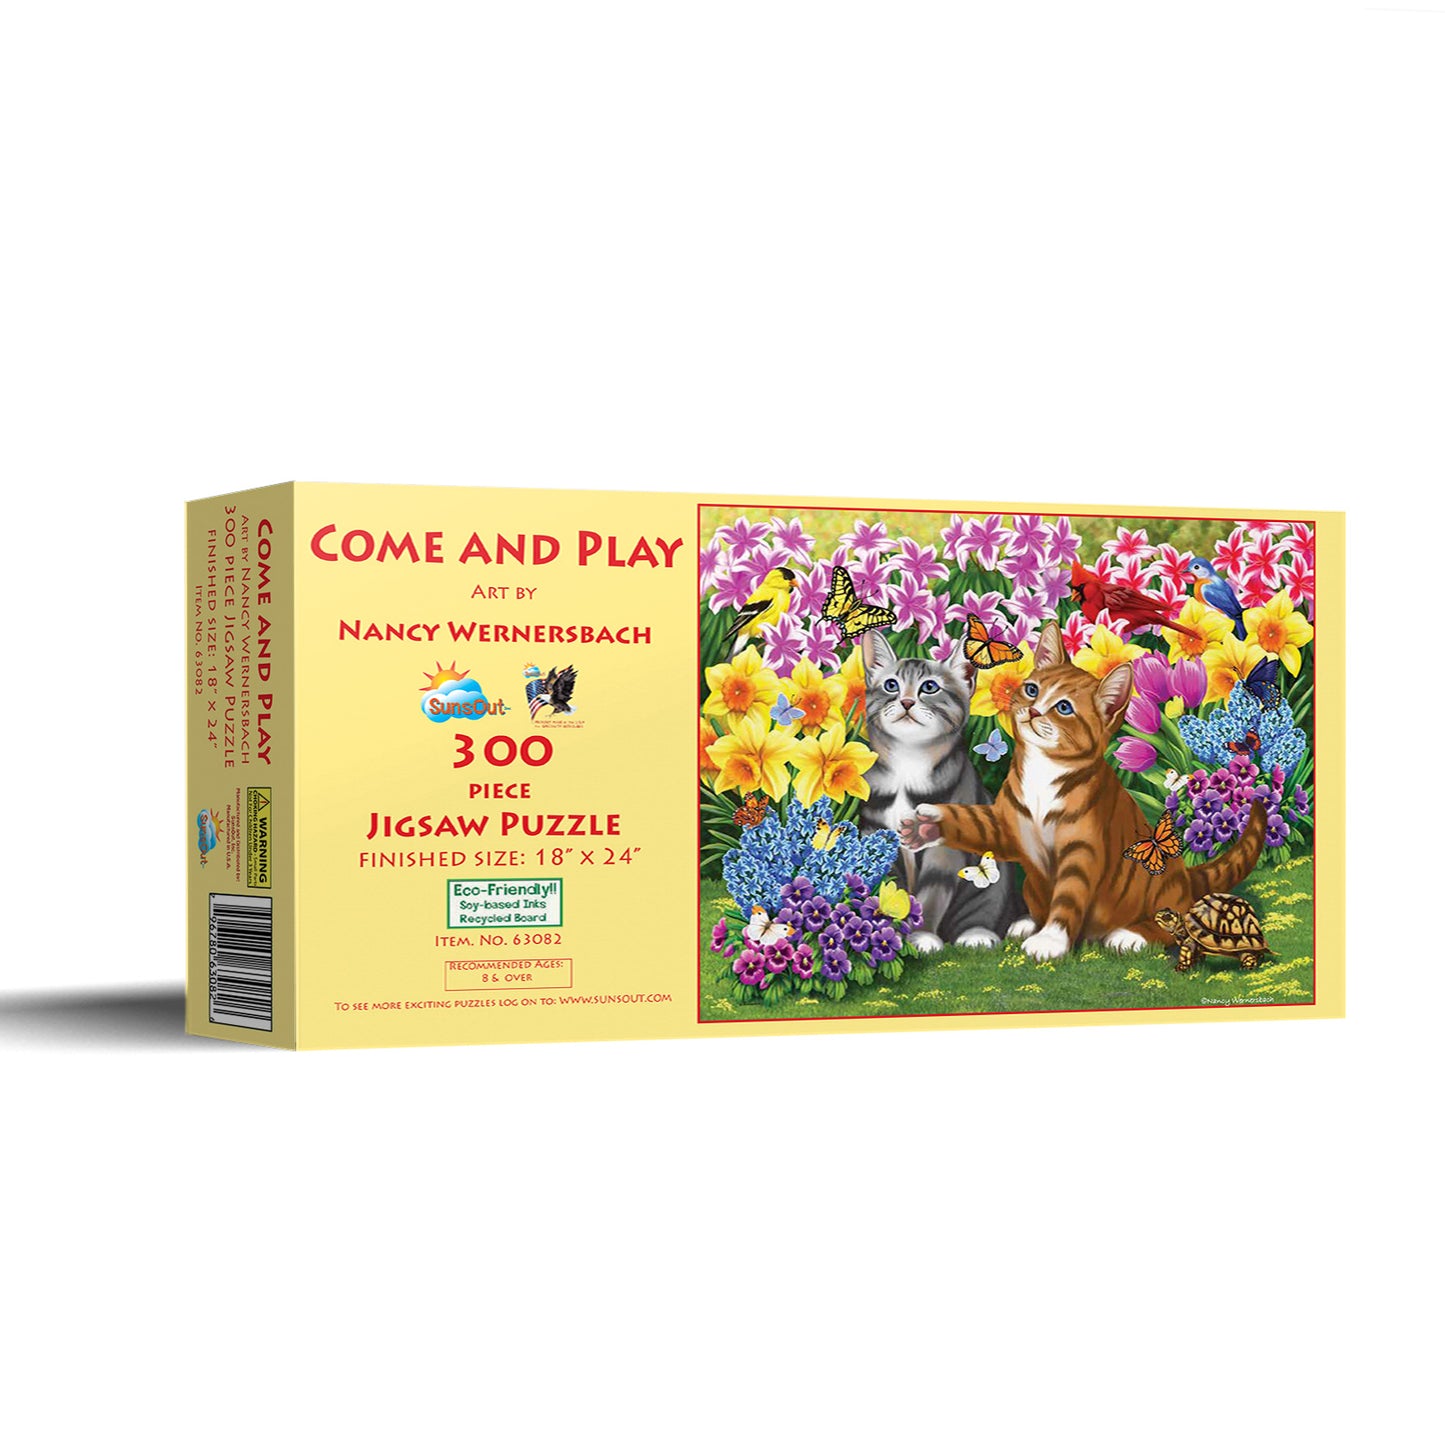 Come and Play - 300 Piece Jigsaw Puzzle